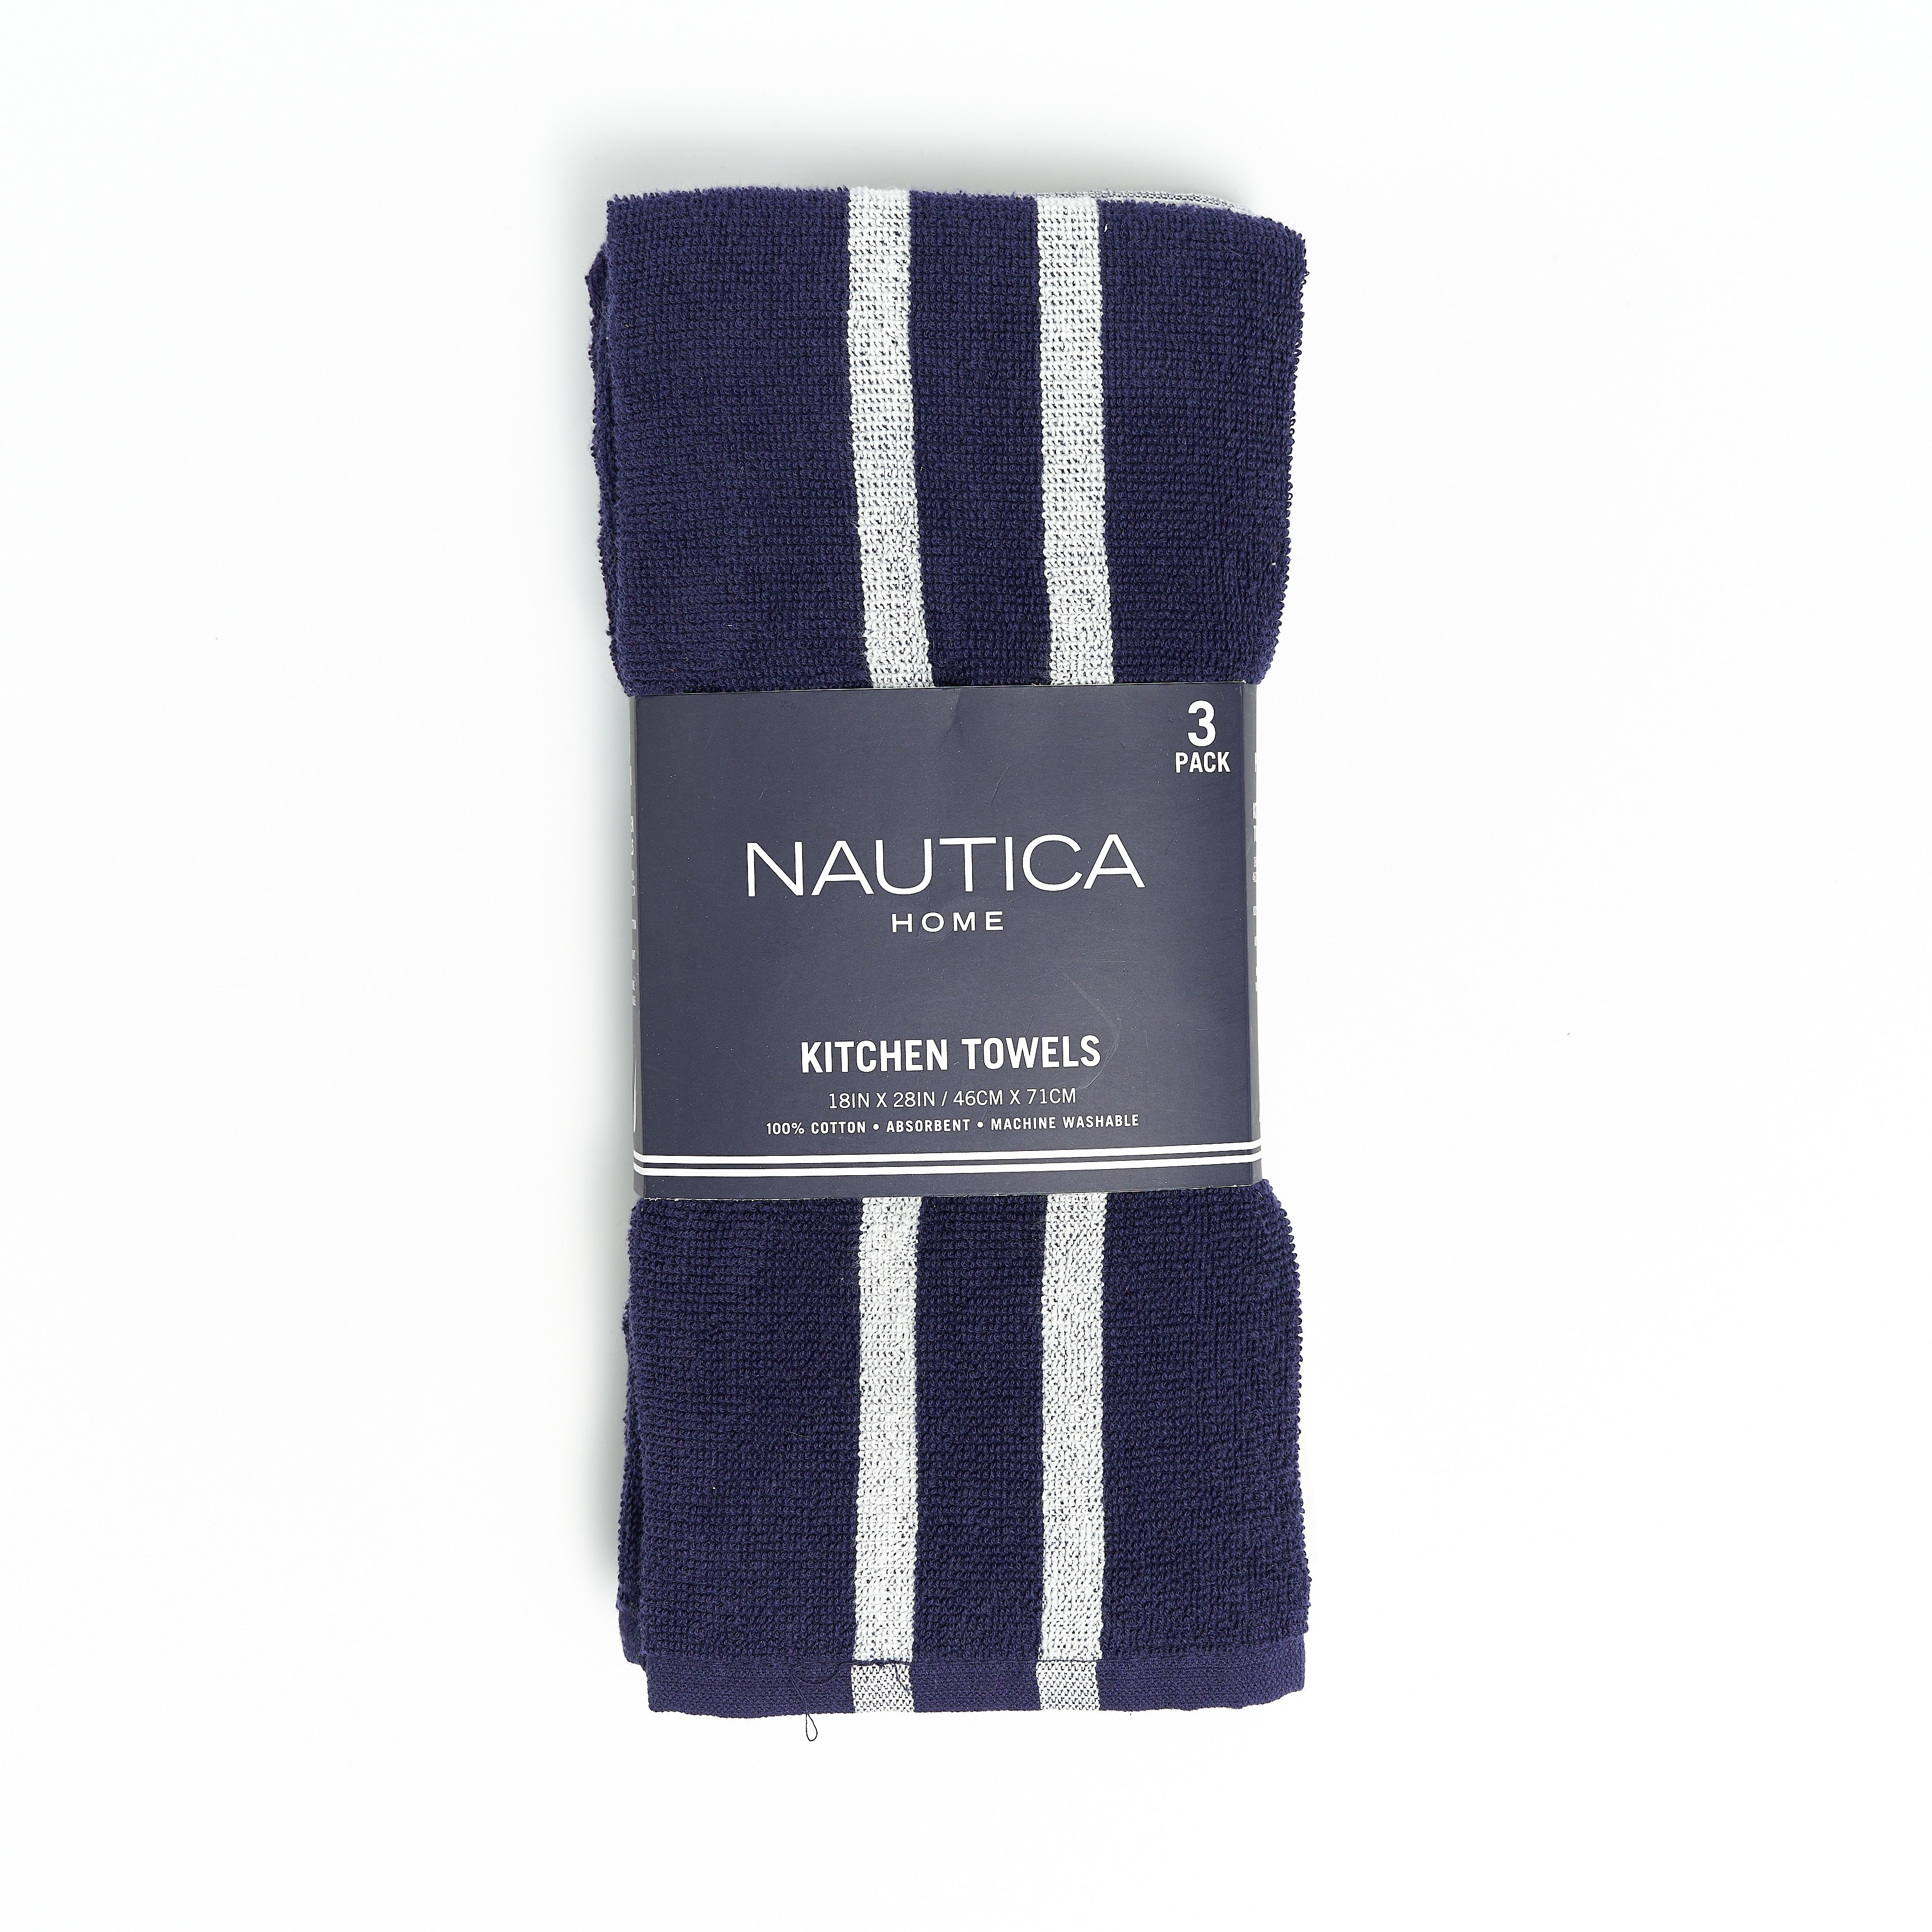 https://ak1.ostkcdn.com/images/products/is/images/direct/e54367210854f1a9a0b33d015f176bd7ffa34667/Nautica-Home-100%25-Cotton-Navy-18-in.-x-28-in.-Kitchen-Towels-%283-Piece-Set%29.jpg